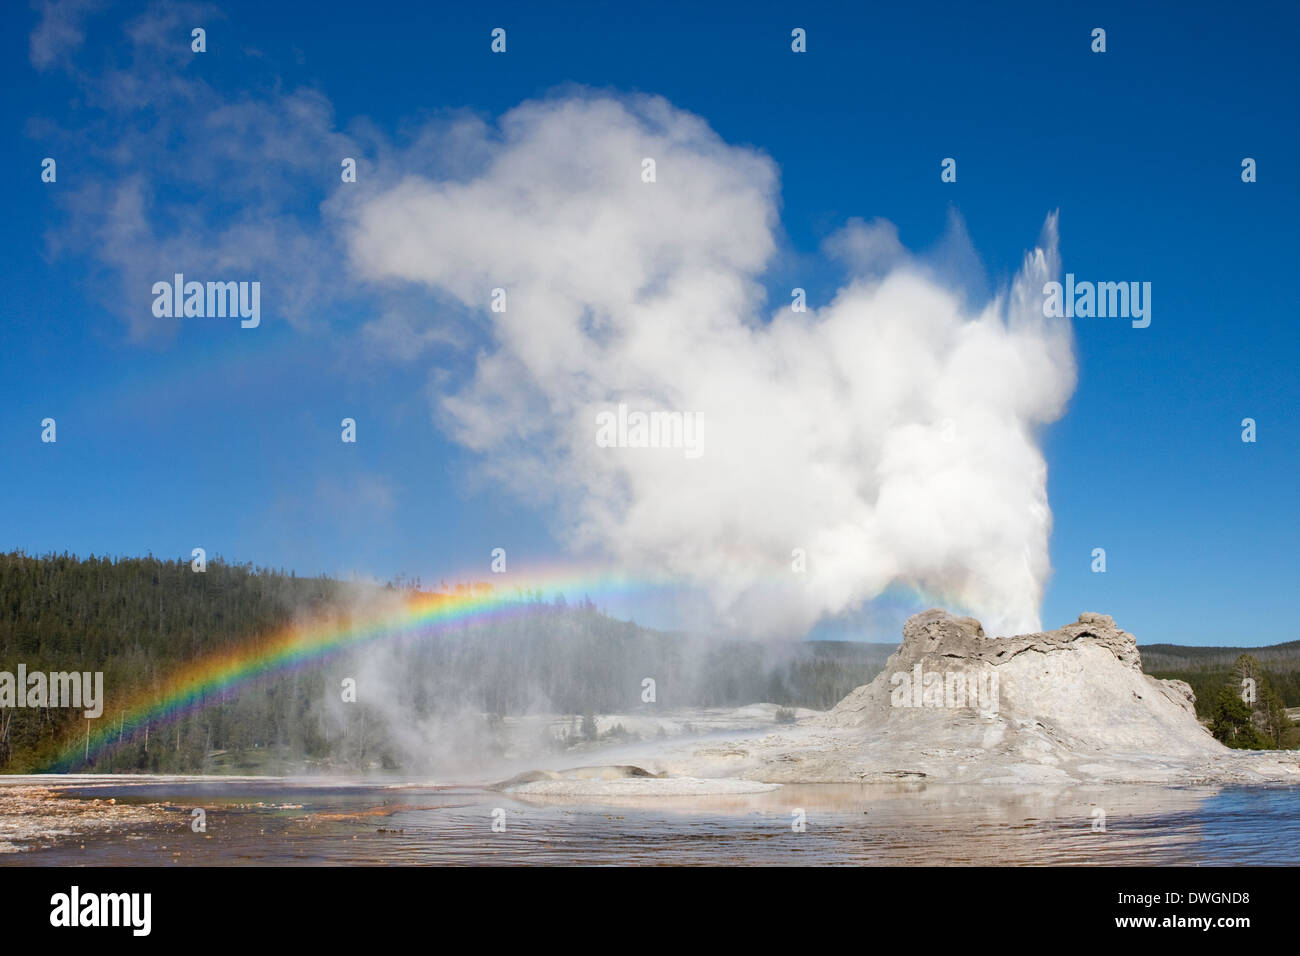 A rainbow appears above Castle Geyser during eruption in Upper Geyser Basin, Yellowstone National Park, Wyoming. Stock Photo